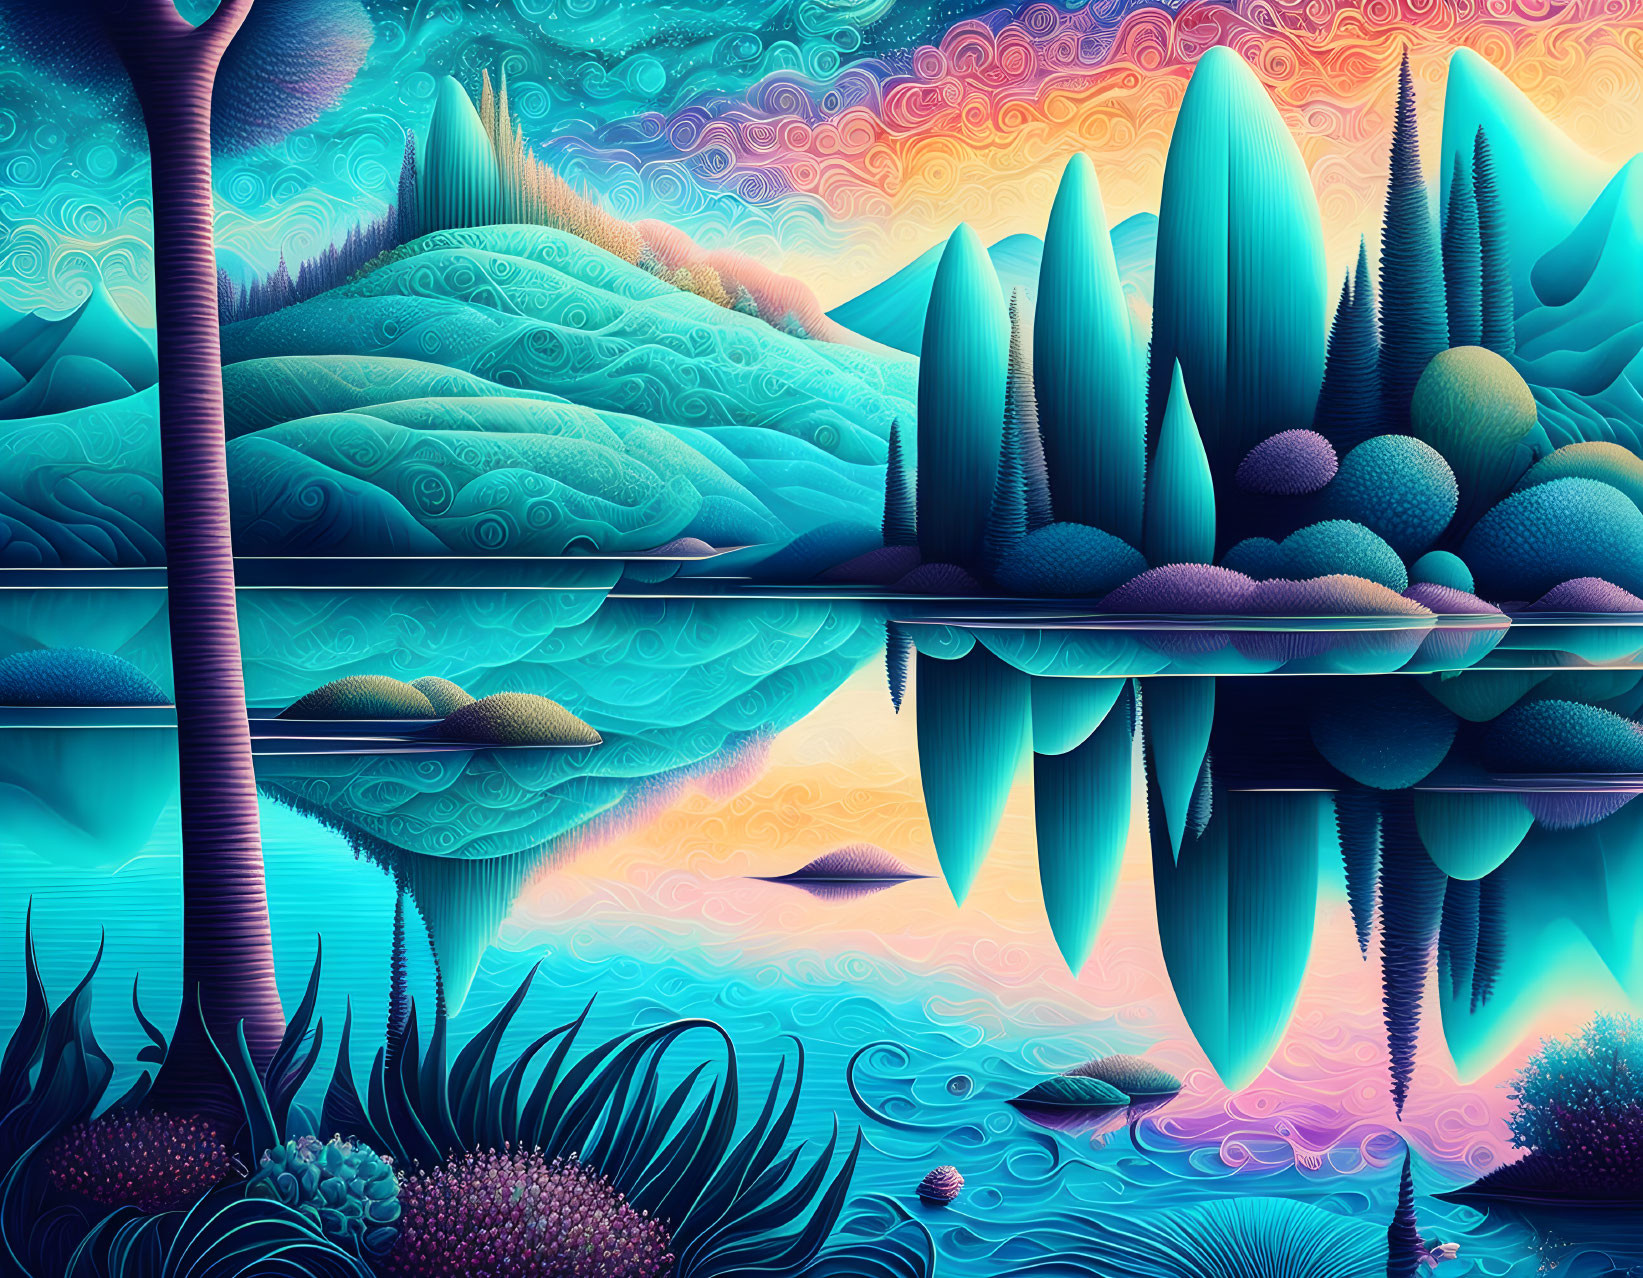 Colorful surreal landscape with stylized foliage and reflective water